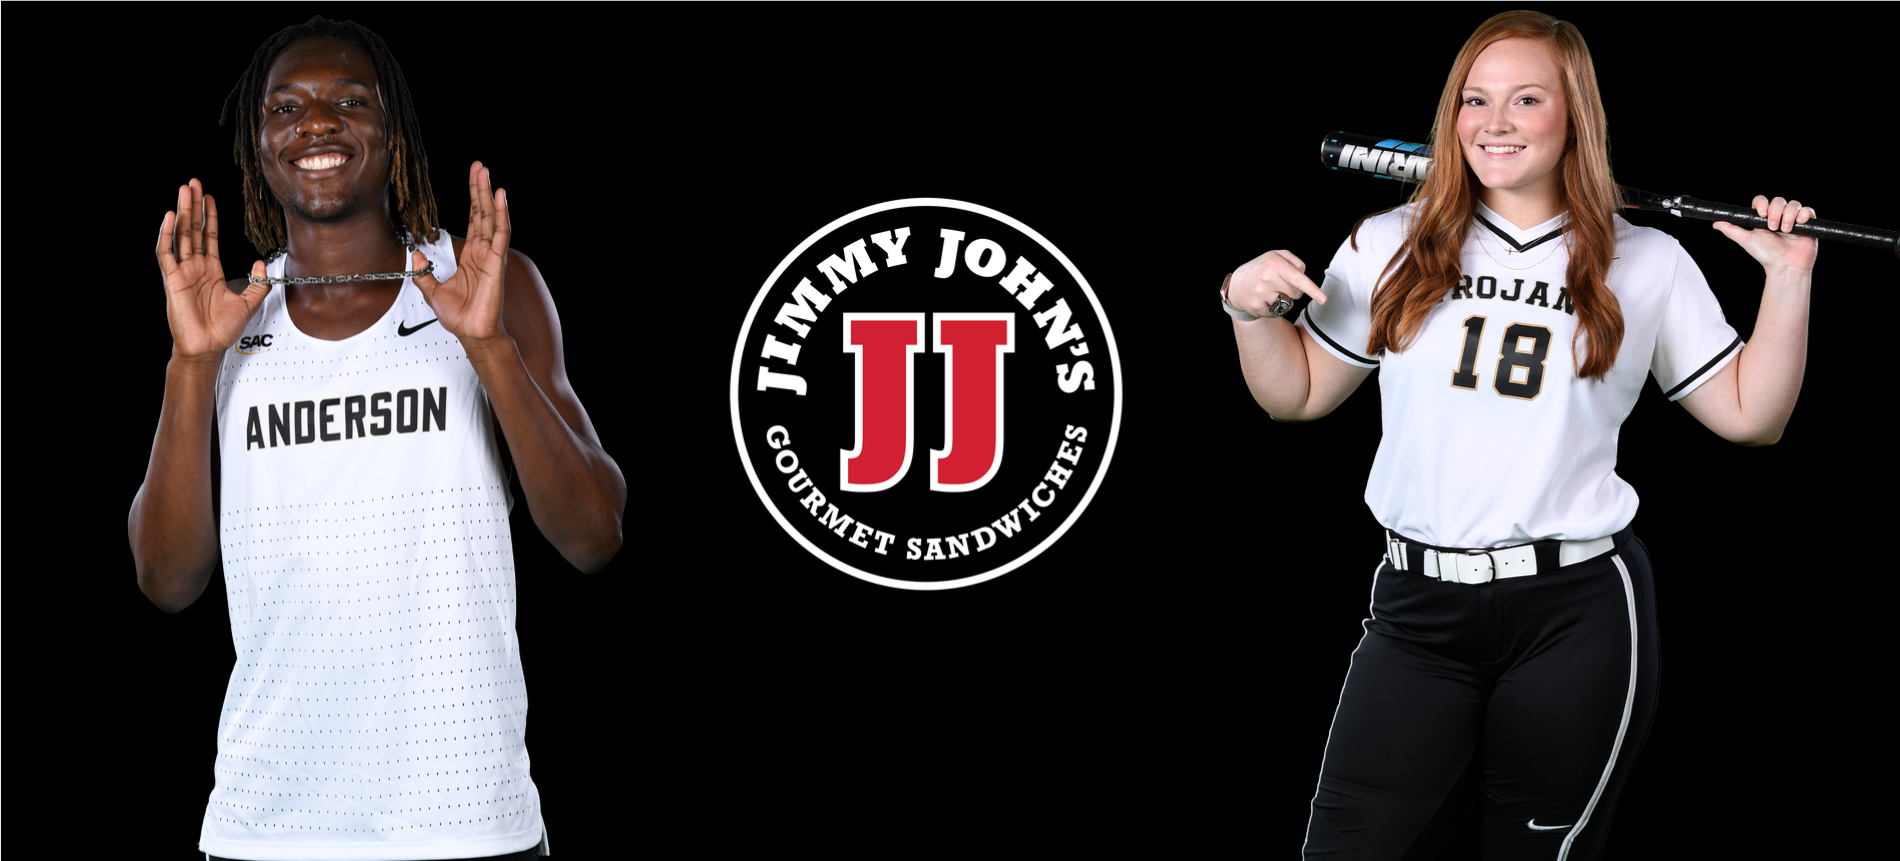 Boatner and Respress Named Jimmy John's Athletes of the Week